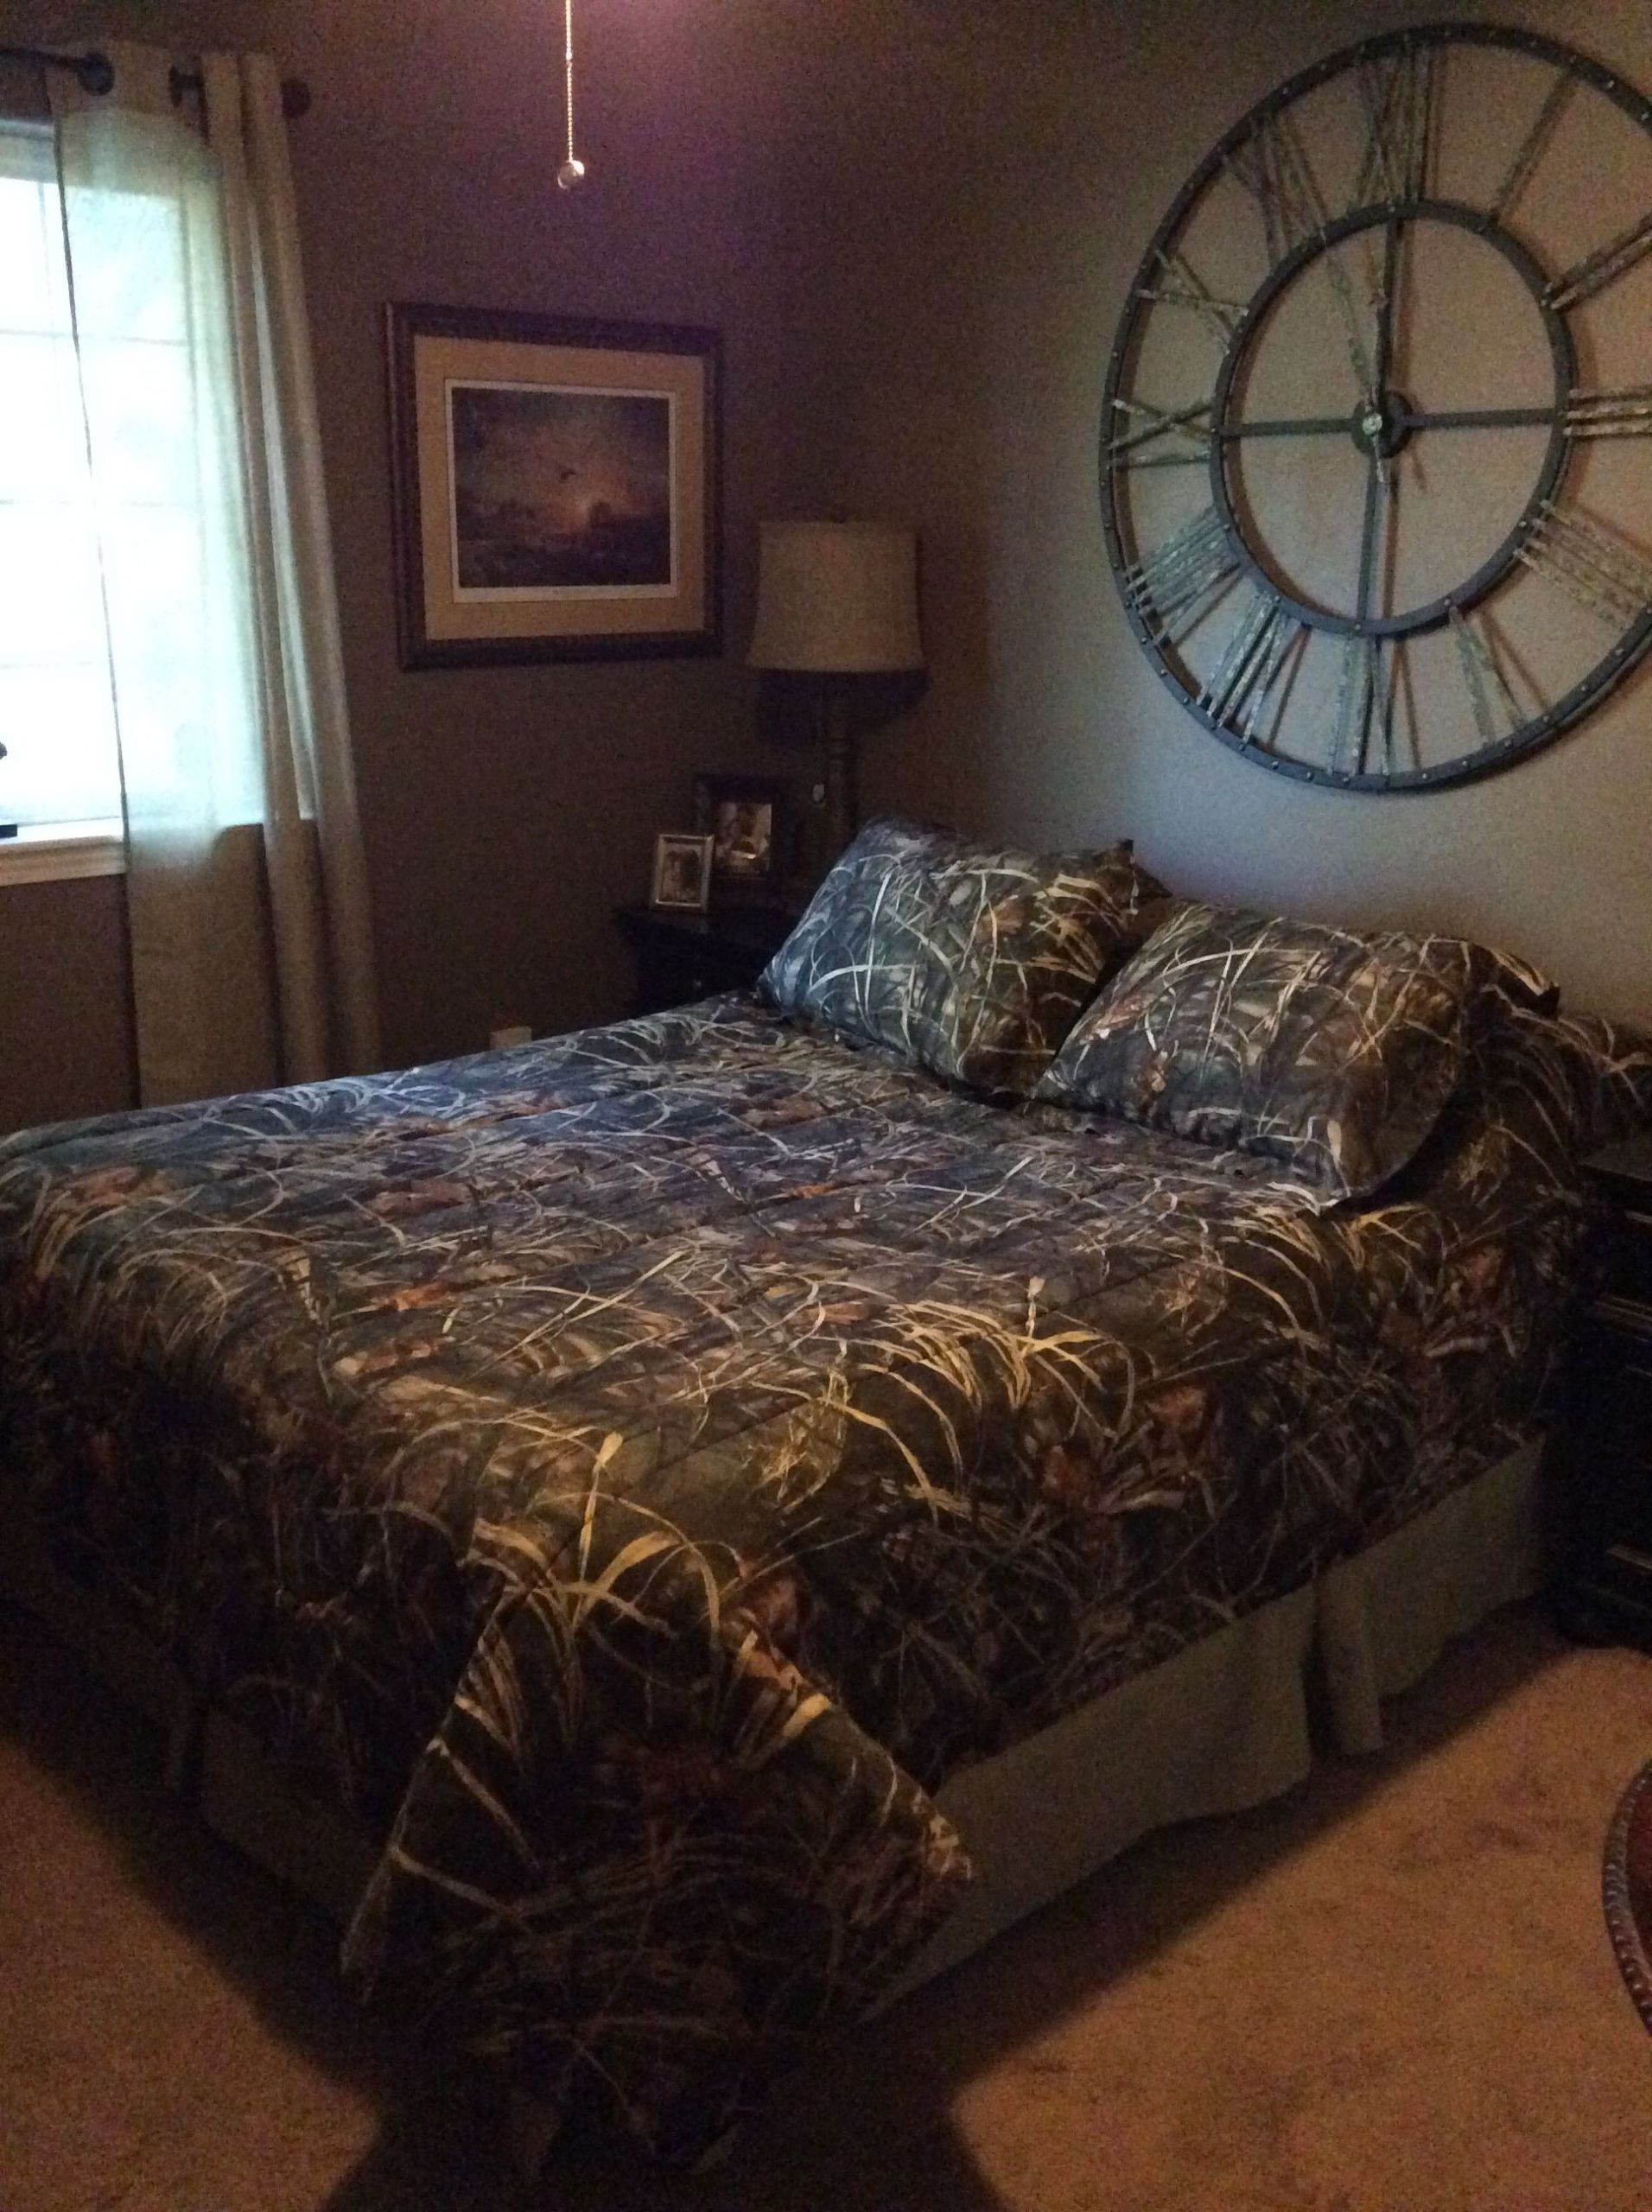 Hunting Bedroom Decor
 Camo decorated bedroom on an adult level Clock